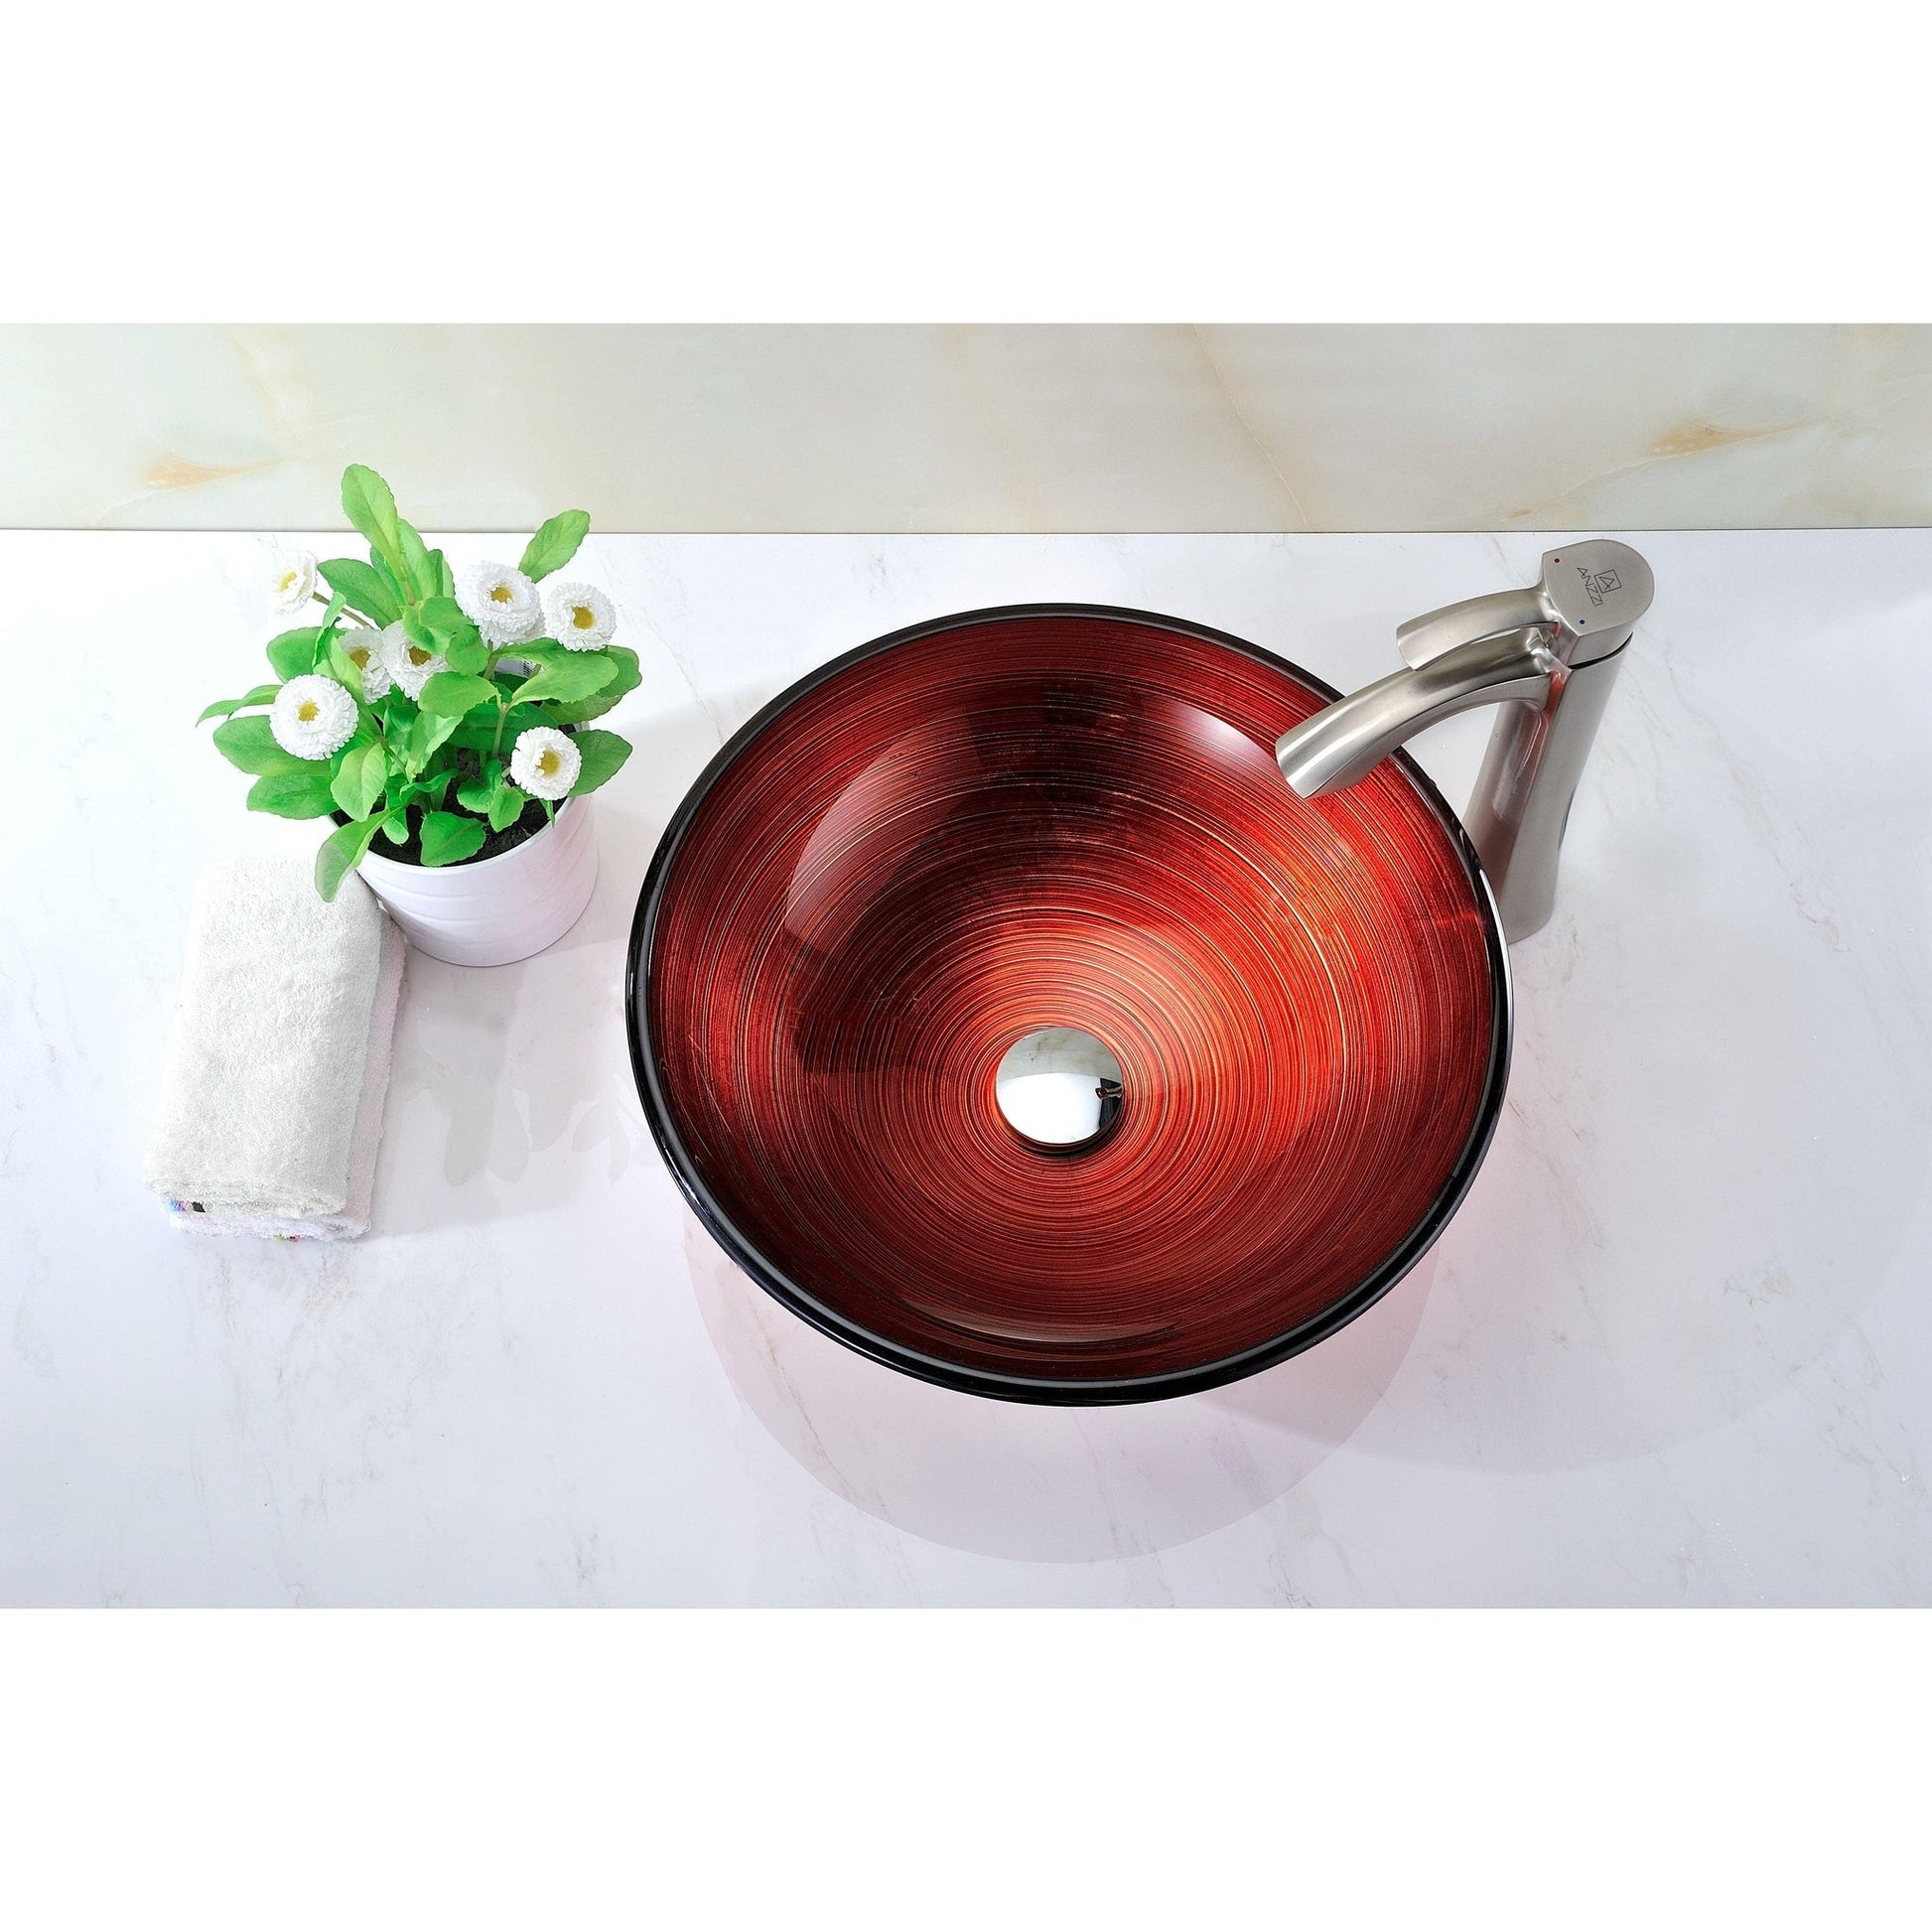 ANZZI Oau Series 17" x 17" Round Lustrous Red Deco-Glass Vessel Sink With Polished Chrome Pop-Up Drain